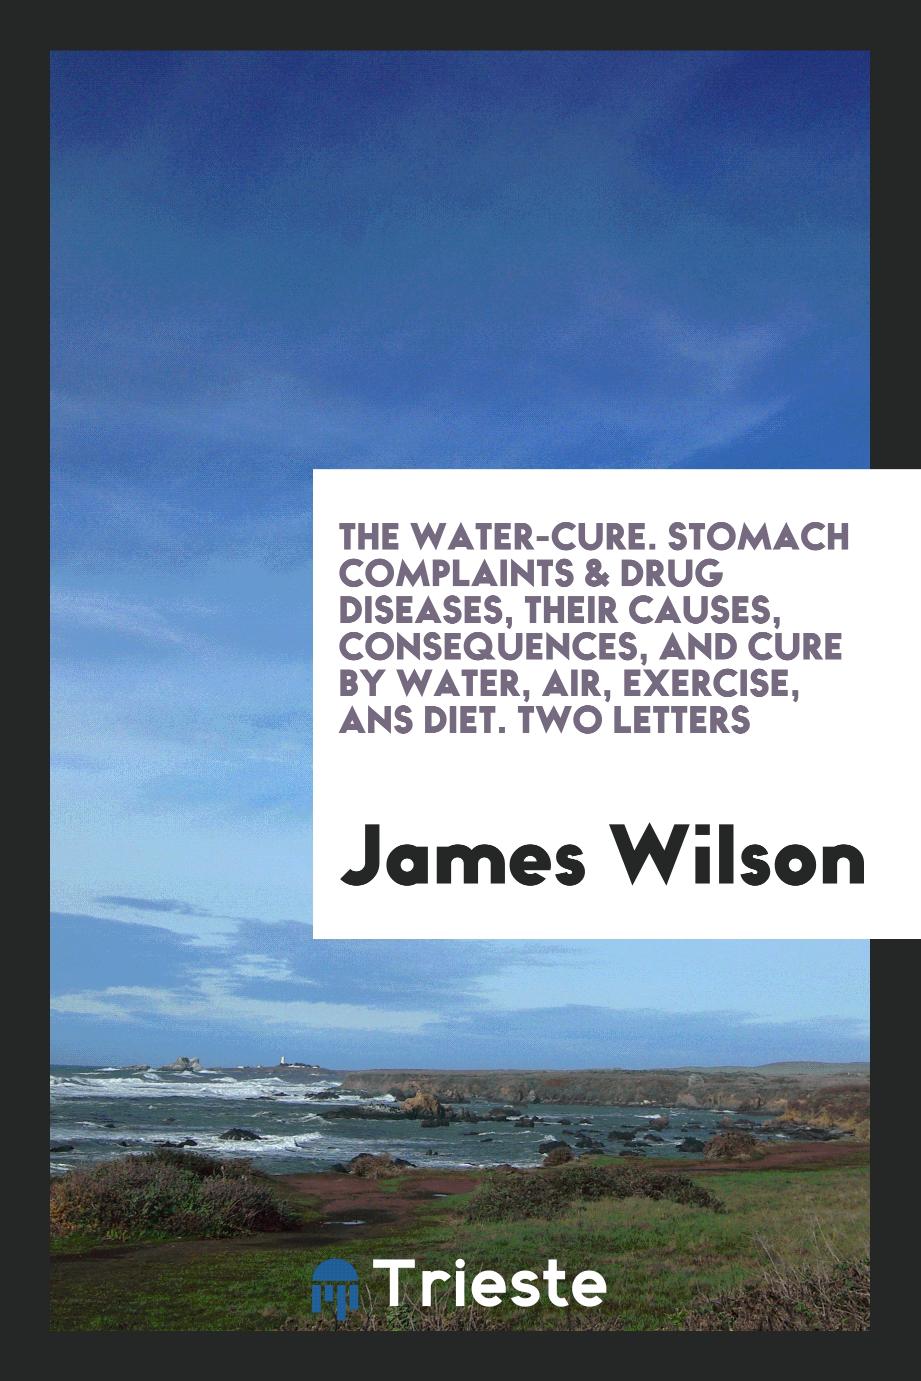 The Water-Cure. Stomach Complaints & Drug Diseases, Their Causes, Consequences, and Cure by Water, Air, Exercise, ans Diet. Two Letters